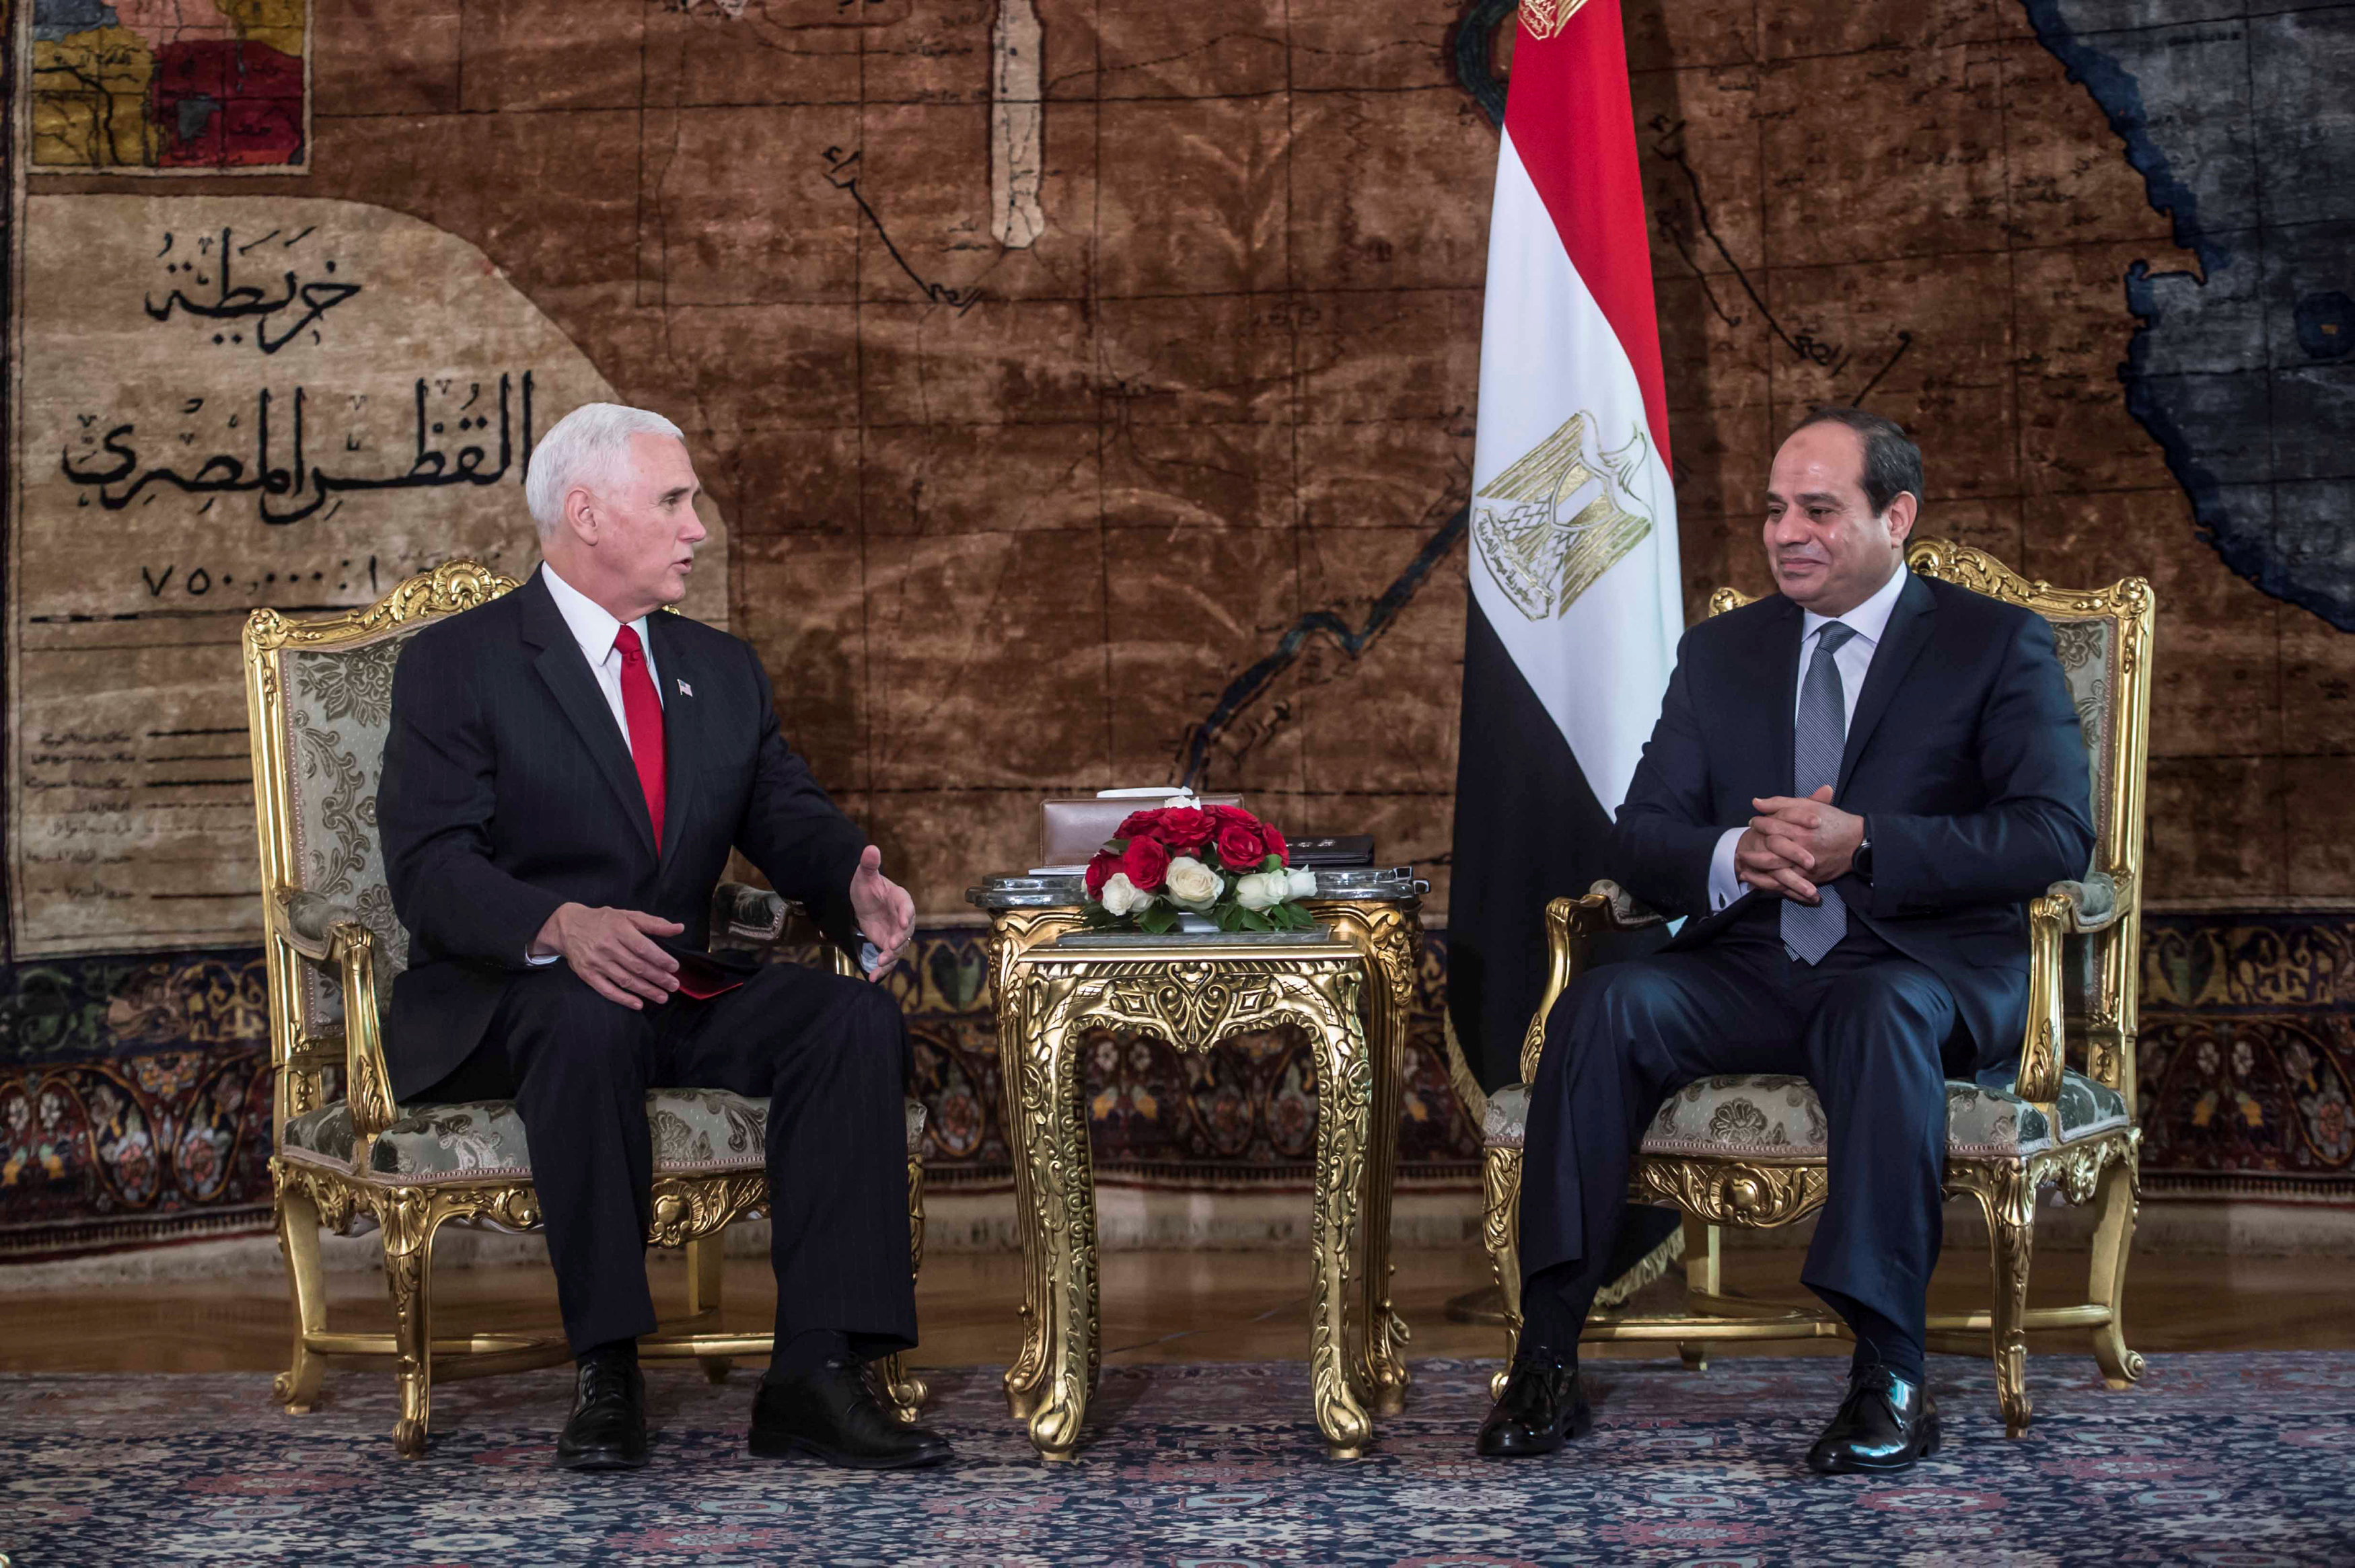 US would back two-state solution, Pence tells Sisi